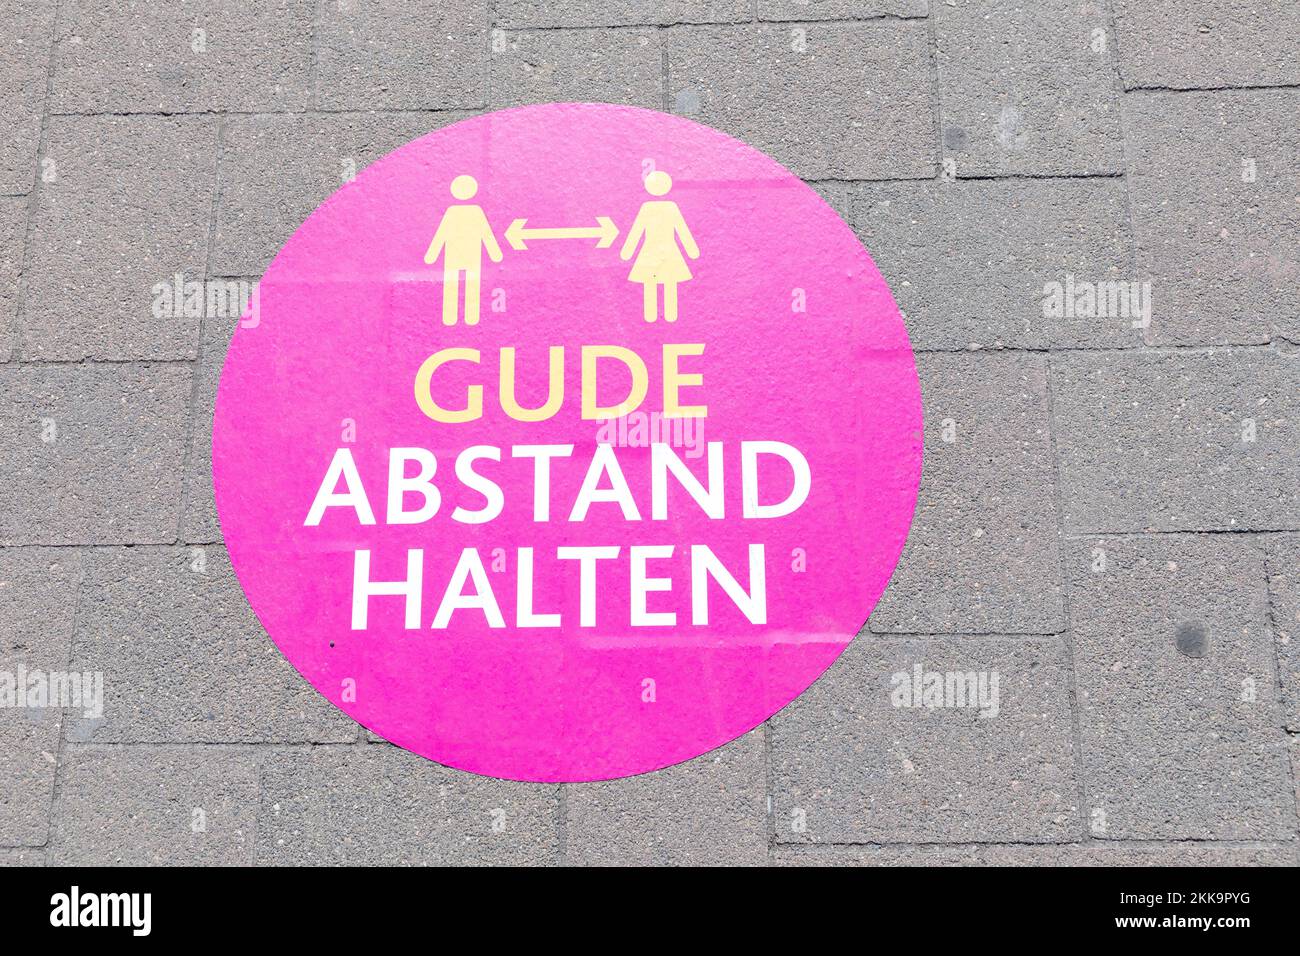 Ruedesheim, Germany - May 29, 2020: signage keep distande (Abstand halten) at the floor of a pedestrian promenade in Ruedesheim, Germany. Stock Photo